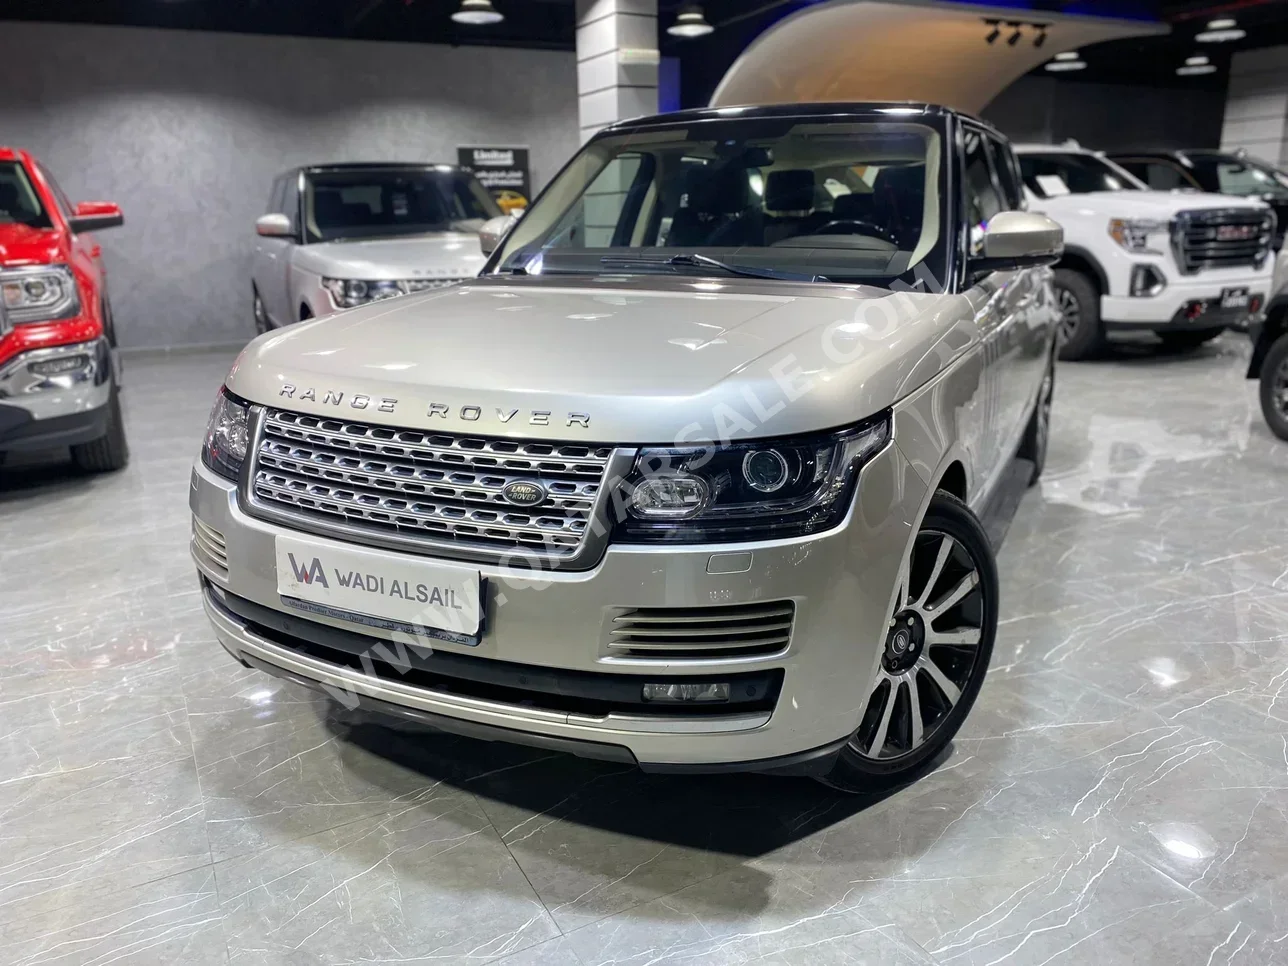 Land Rover  Range Rover  Vogue  2016  Automatic  115,000 Km  8 Cylinder  Four Wheel Drive (4WD)  SUV  Gold